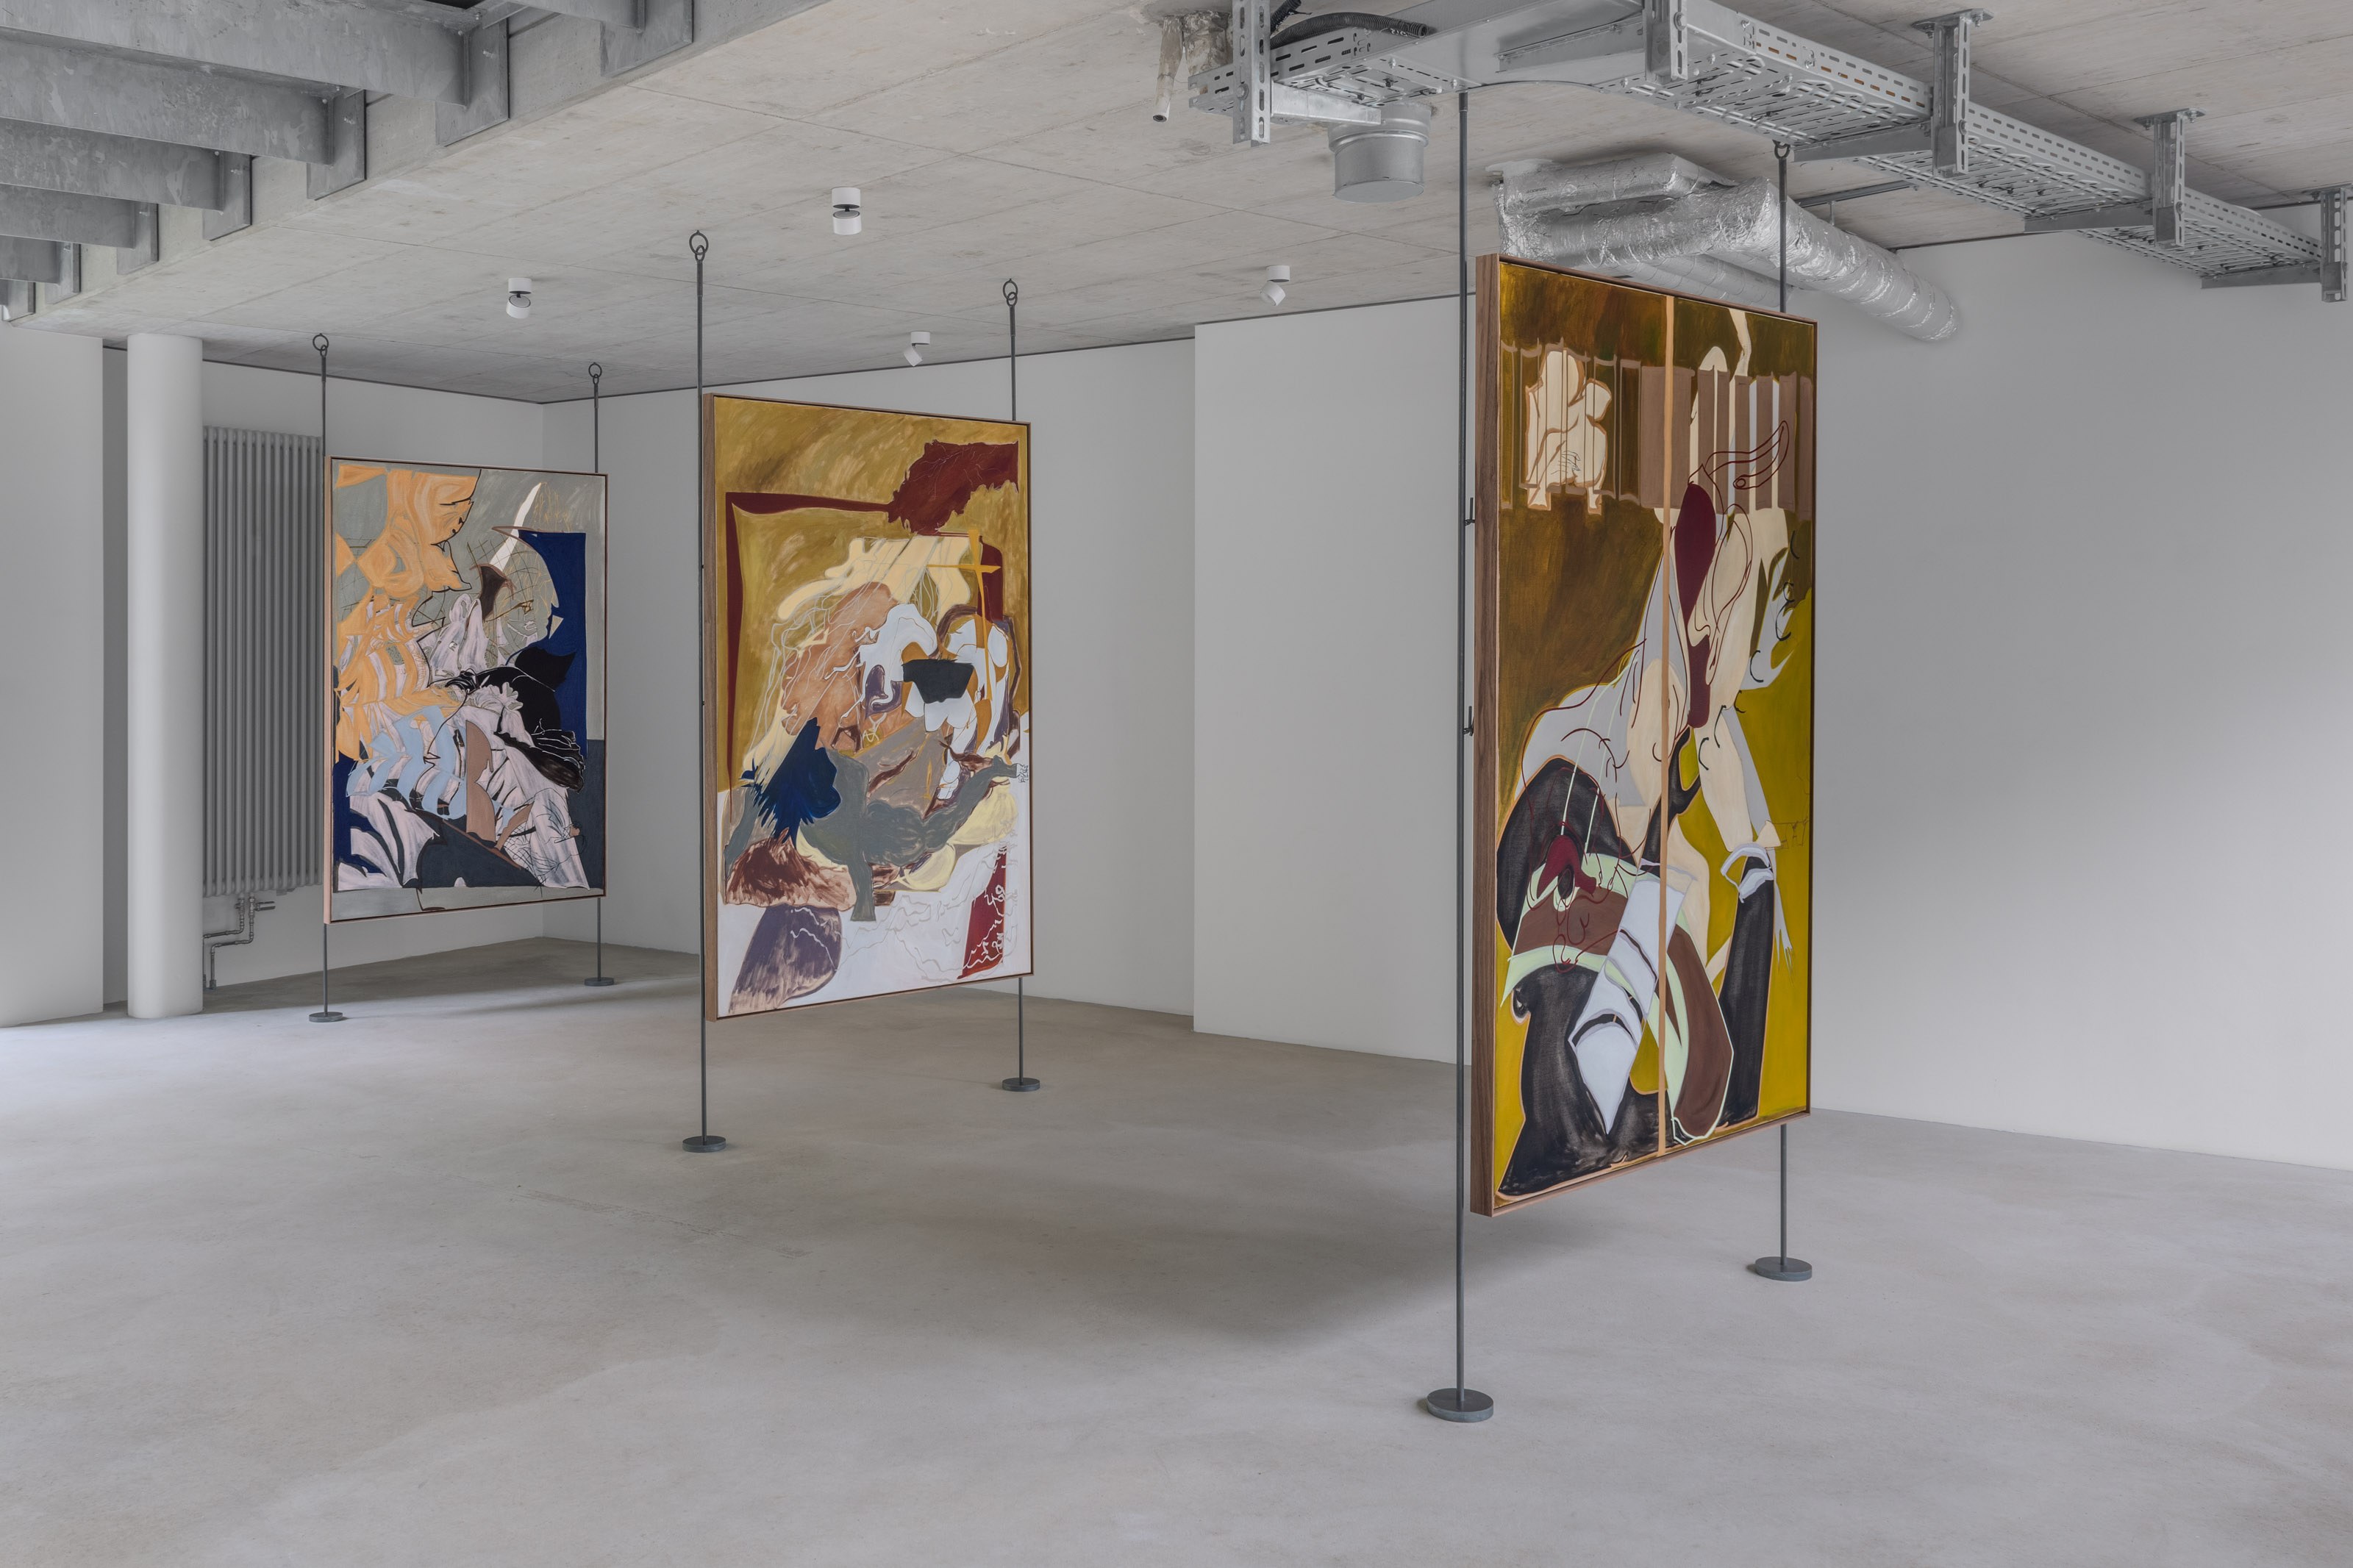 Lisa Jo, Trouble Every Day, installation view at Galerie Molitor 